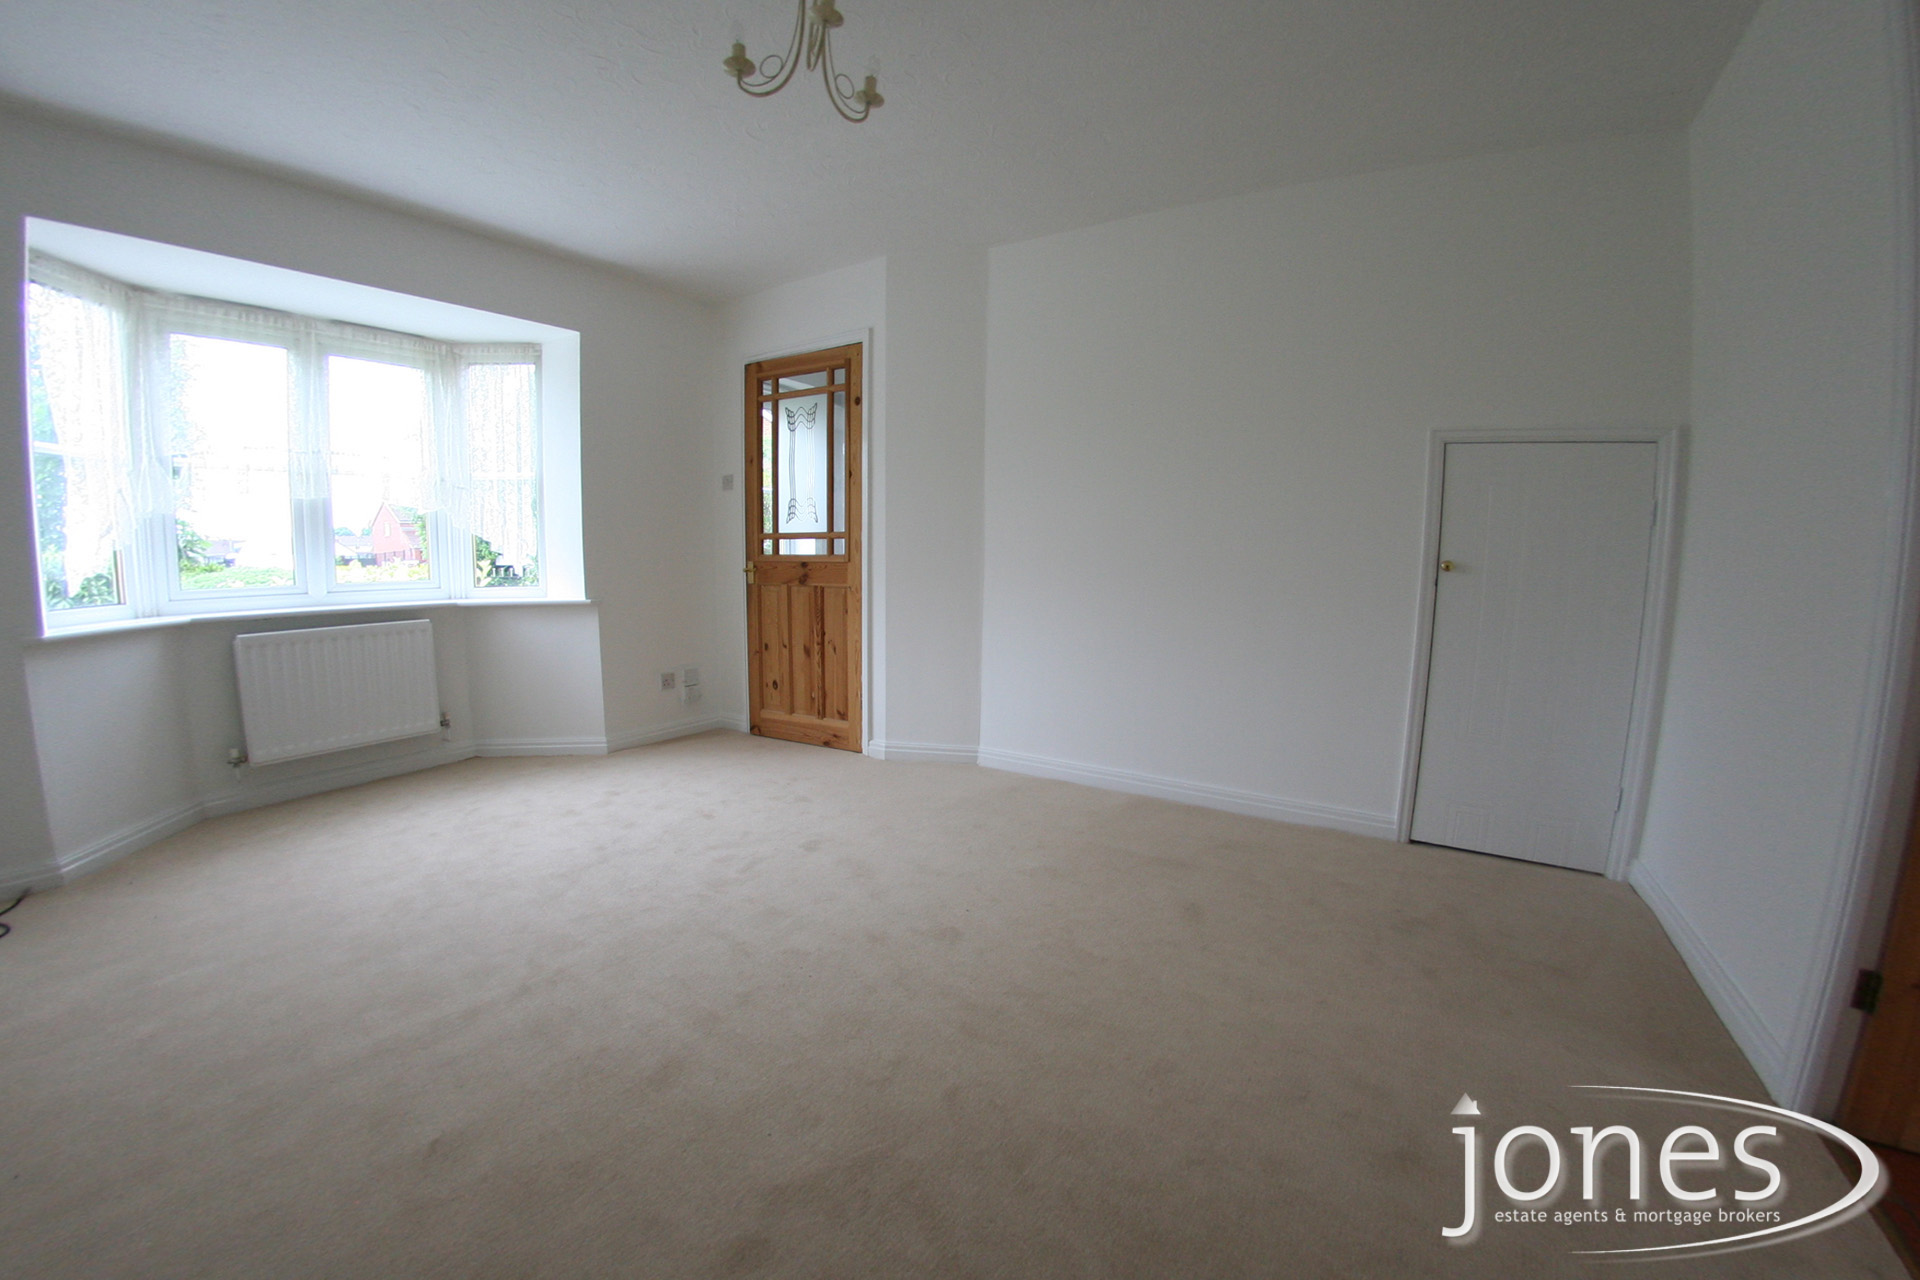 Home for Sale Let - Photo 02 Honeycomb Avenue, Stockton on Tees, TS19 0FF